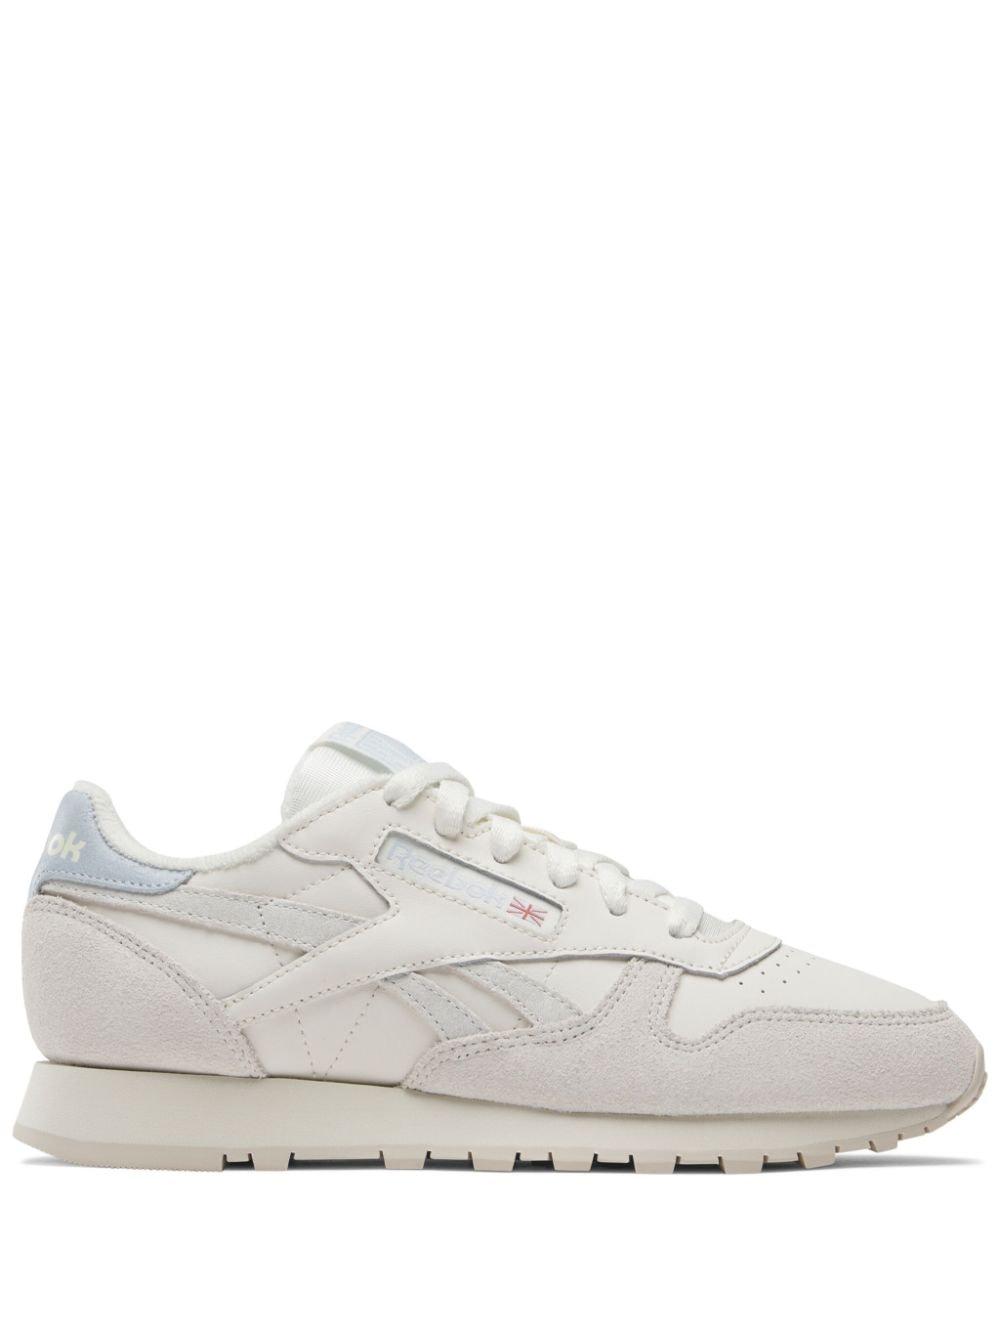 Reebok Classic Panelled Leather Sneakers in White | Lyst